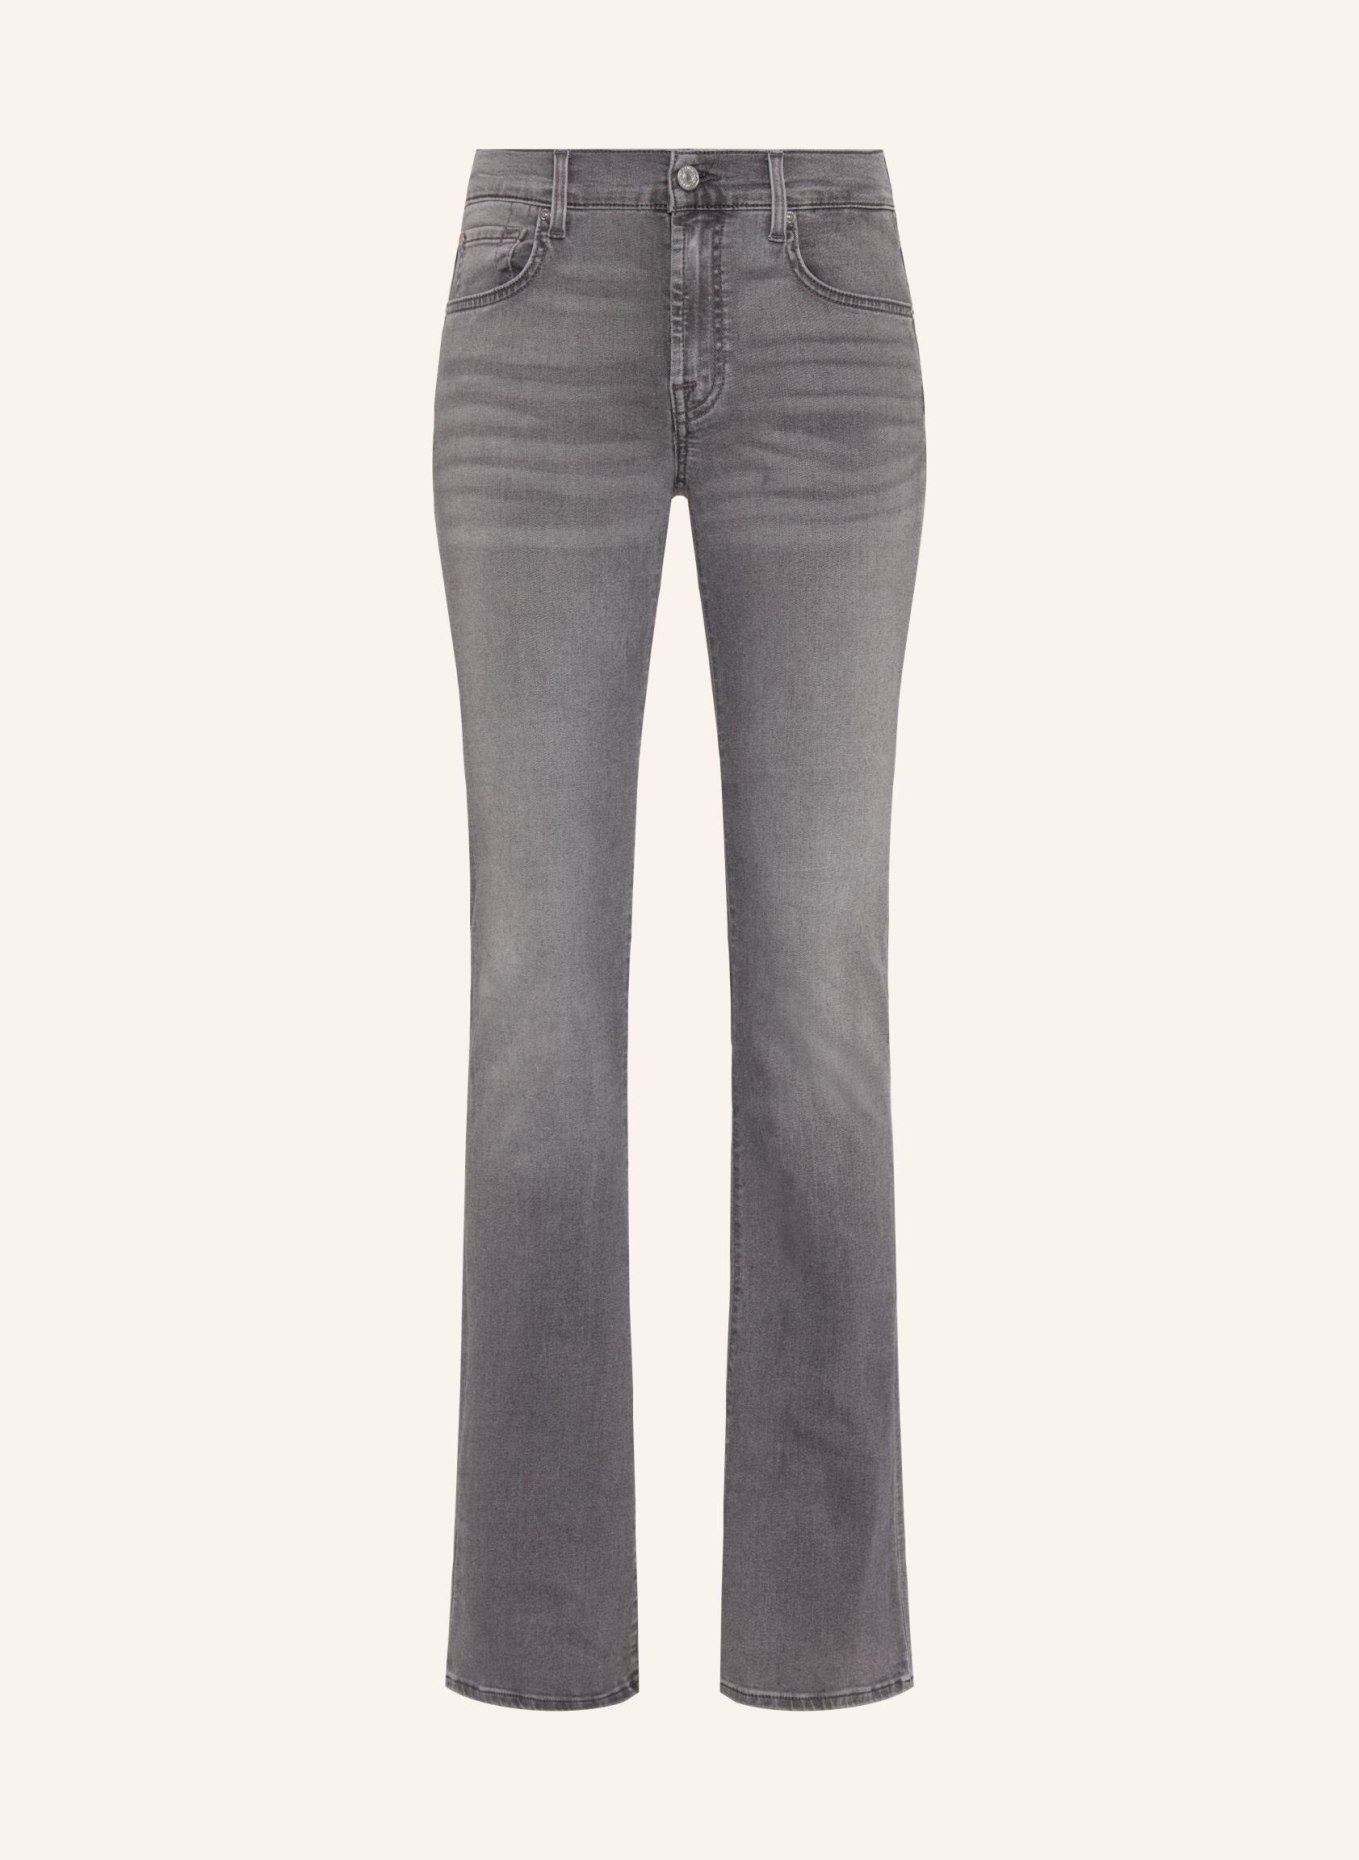 7 for all mankind Jeans BOOTCUT Bootcut Fit, Farbe: GRAU (Bild 1)